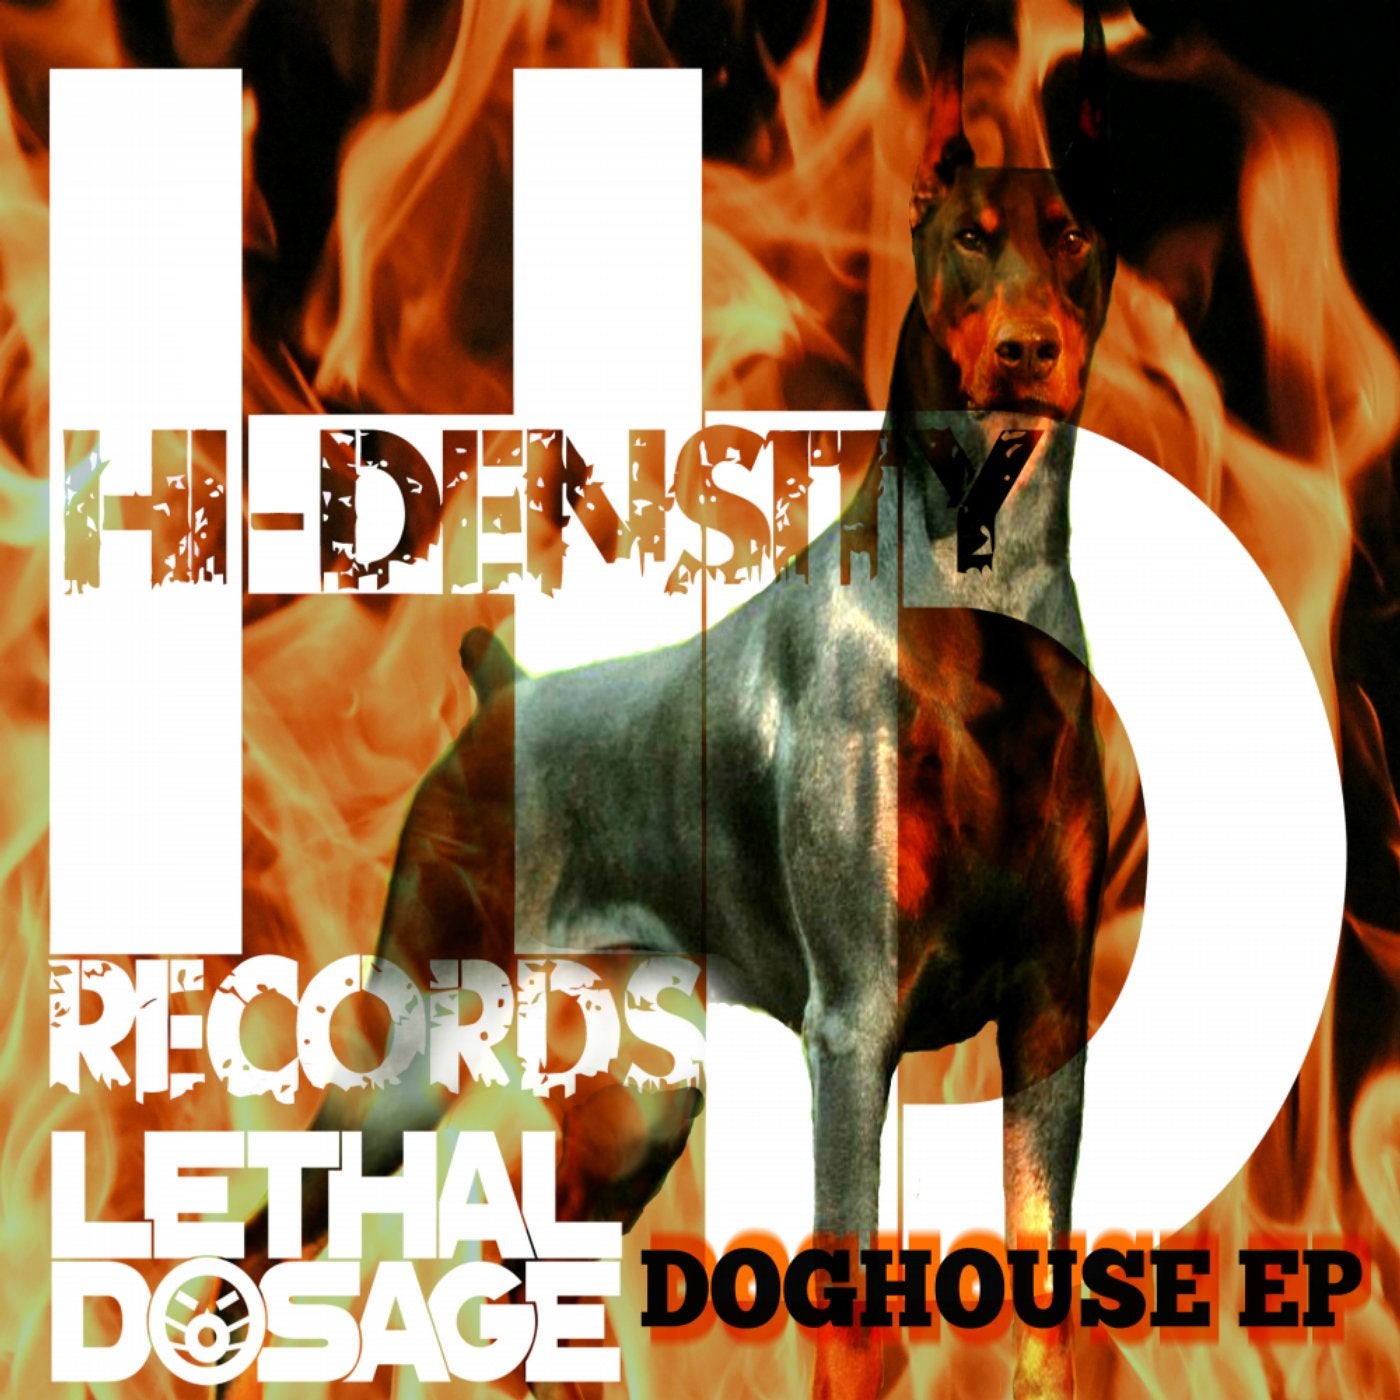 Doghouse EP